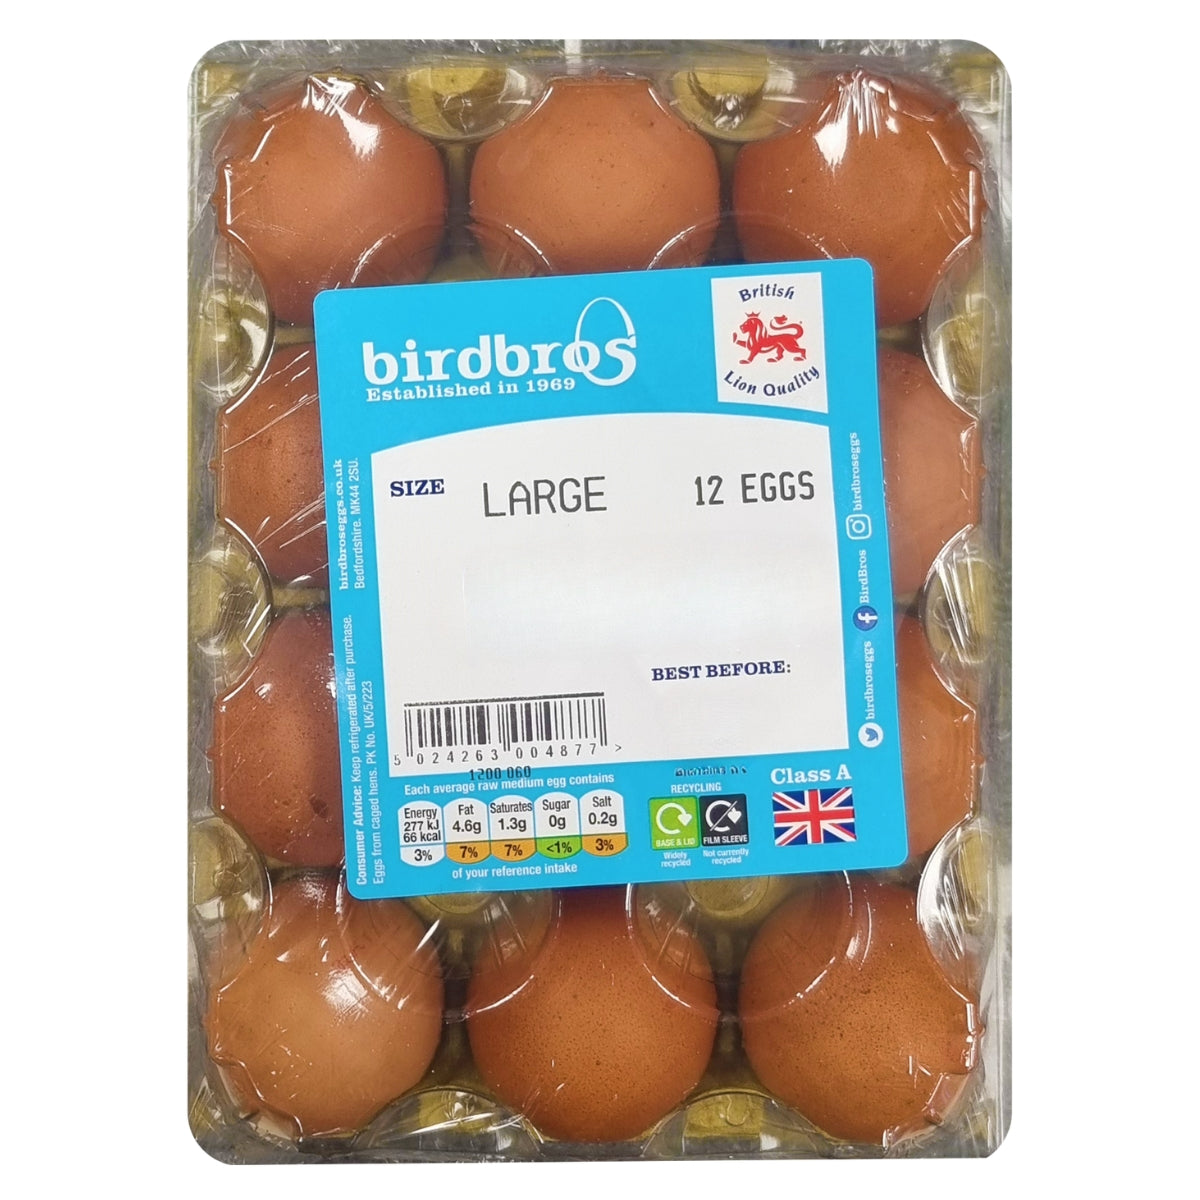 A box of Birdbros - Large Eggs - 12 Pack with a british flag on it.